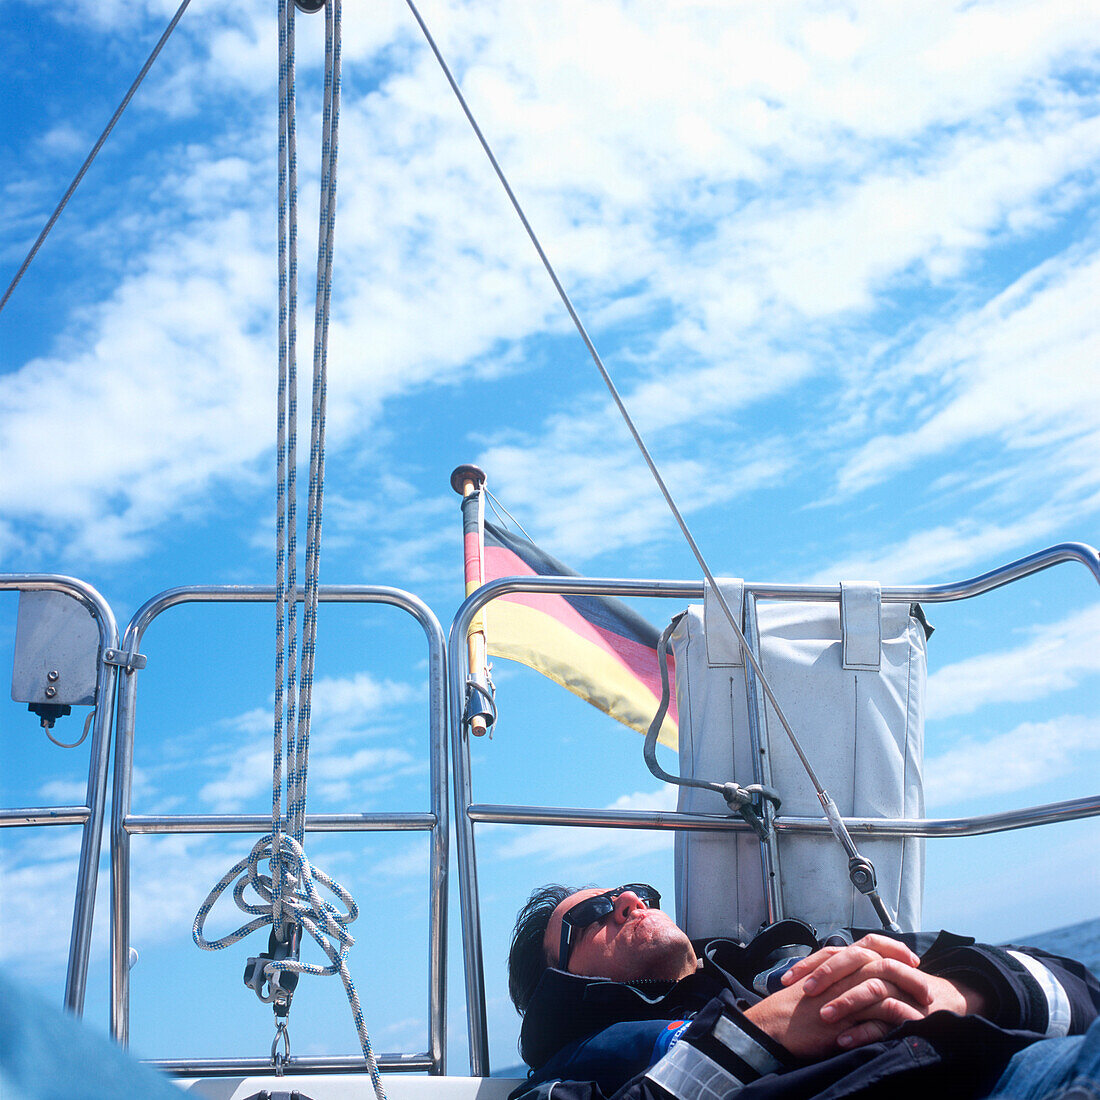 Man resting on deck of a sailboat, Bay of Kiel between Germany and Denmark